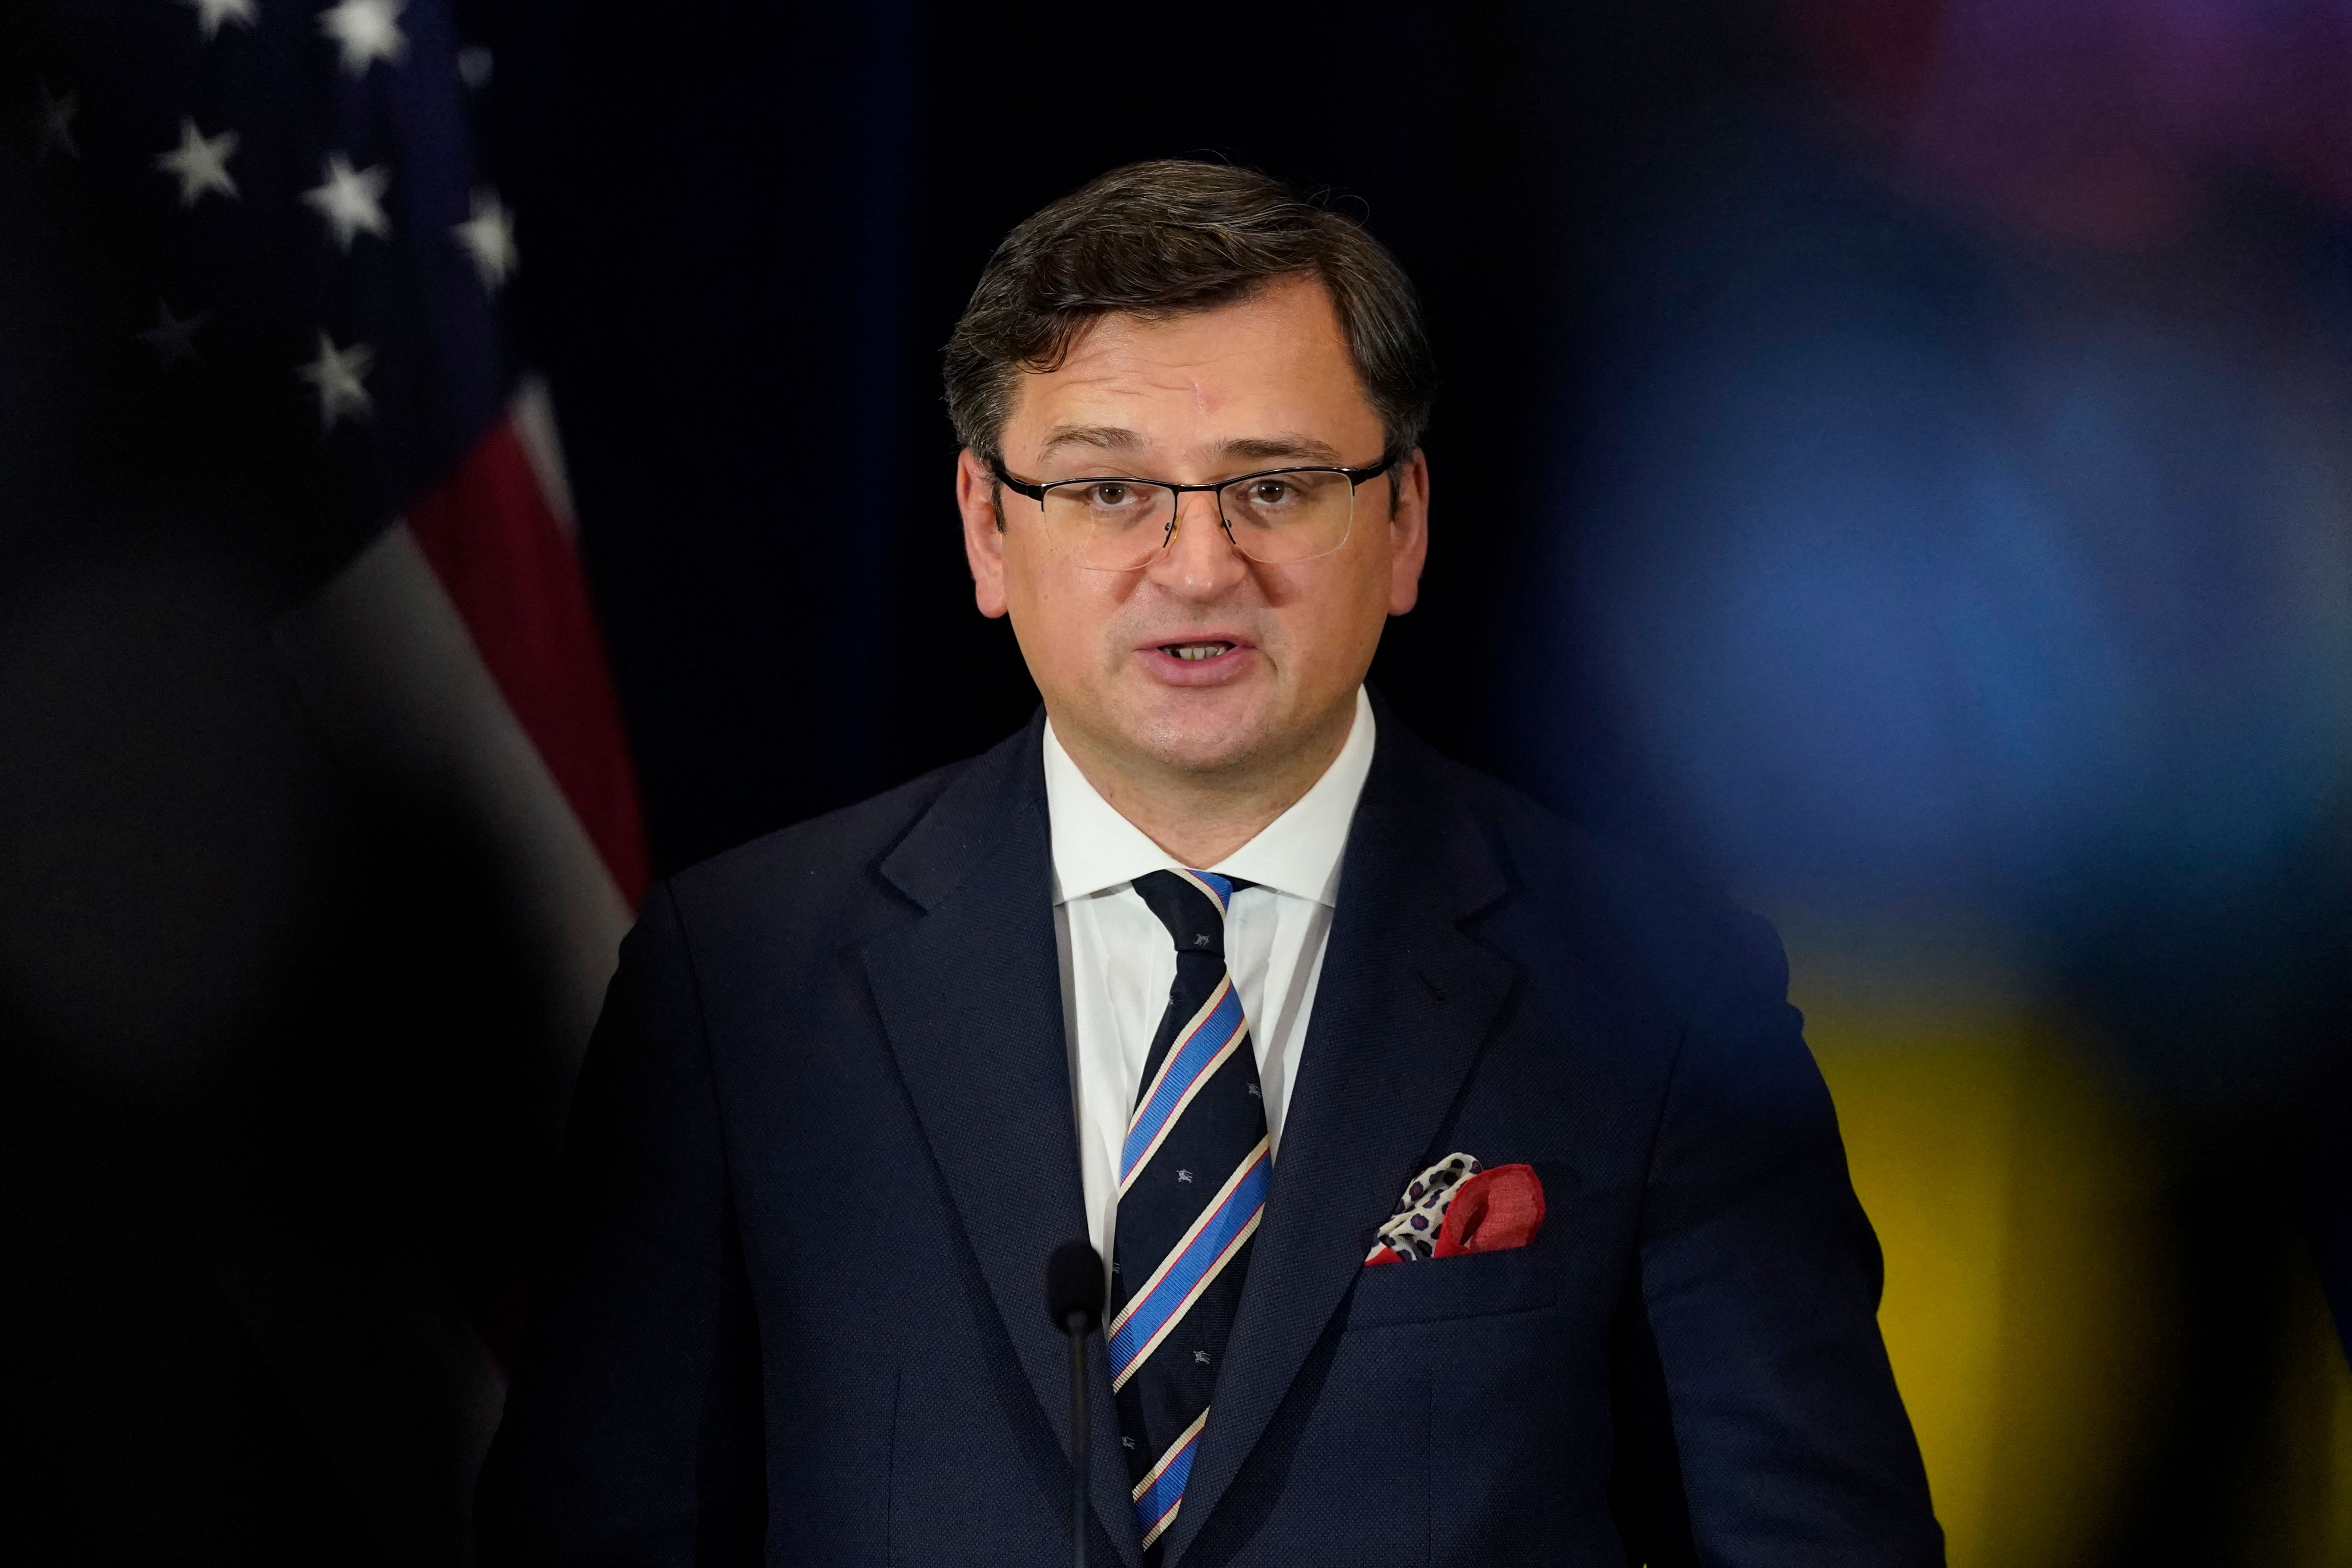 Ukraine's Foreign Minister Dmytro Kuleba speaks during a news conference with Secretary of State Antony Blinken at the State Department in Washington, DC, on February 22.